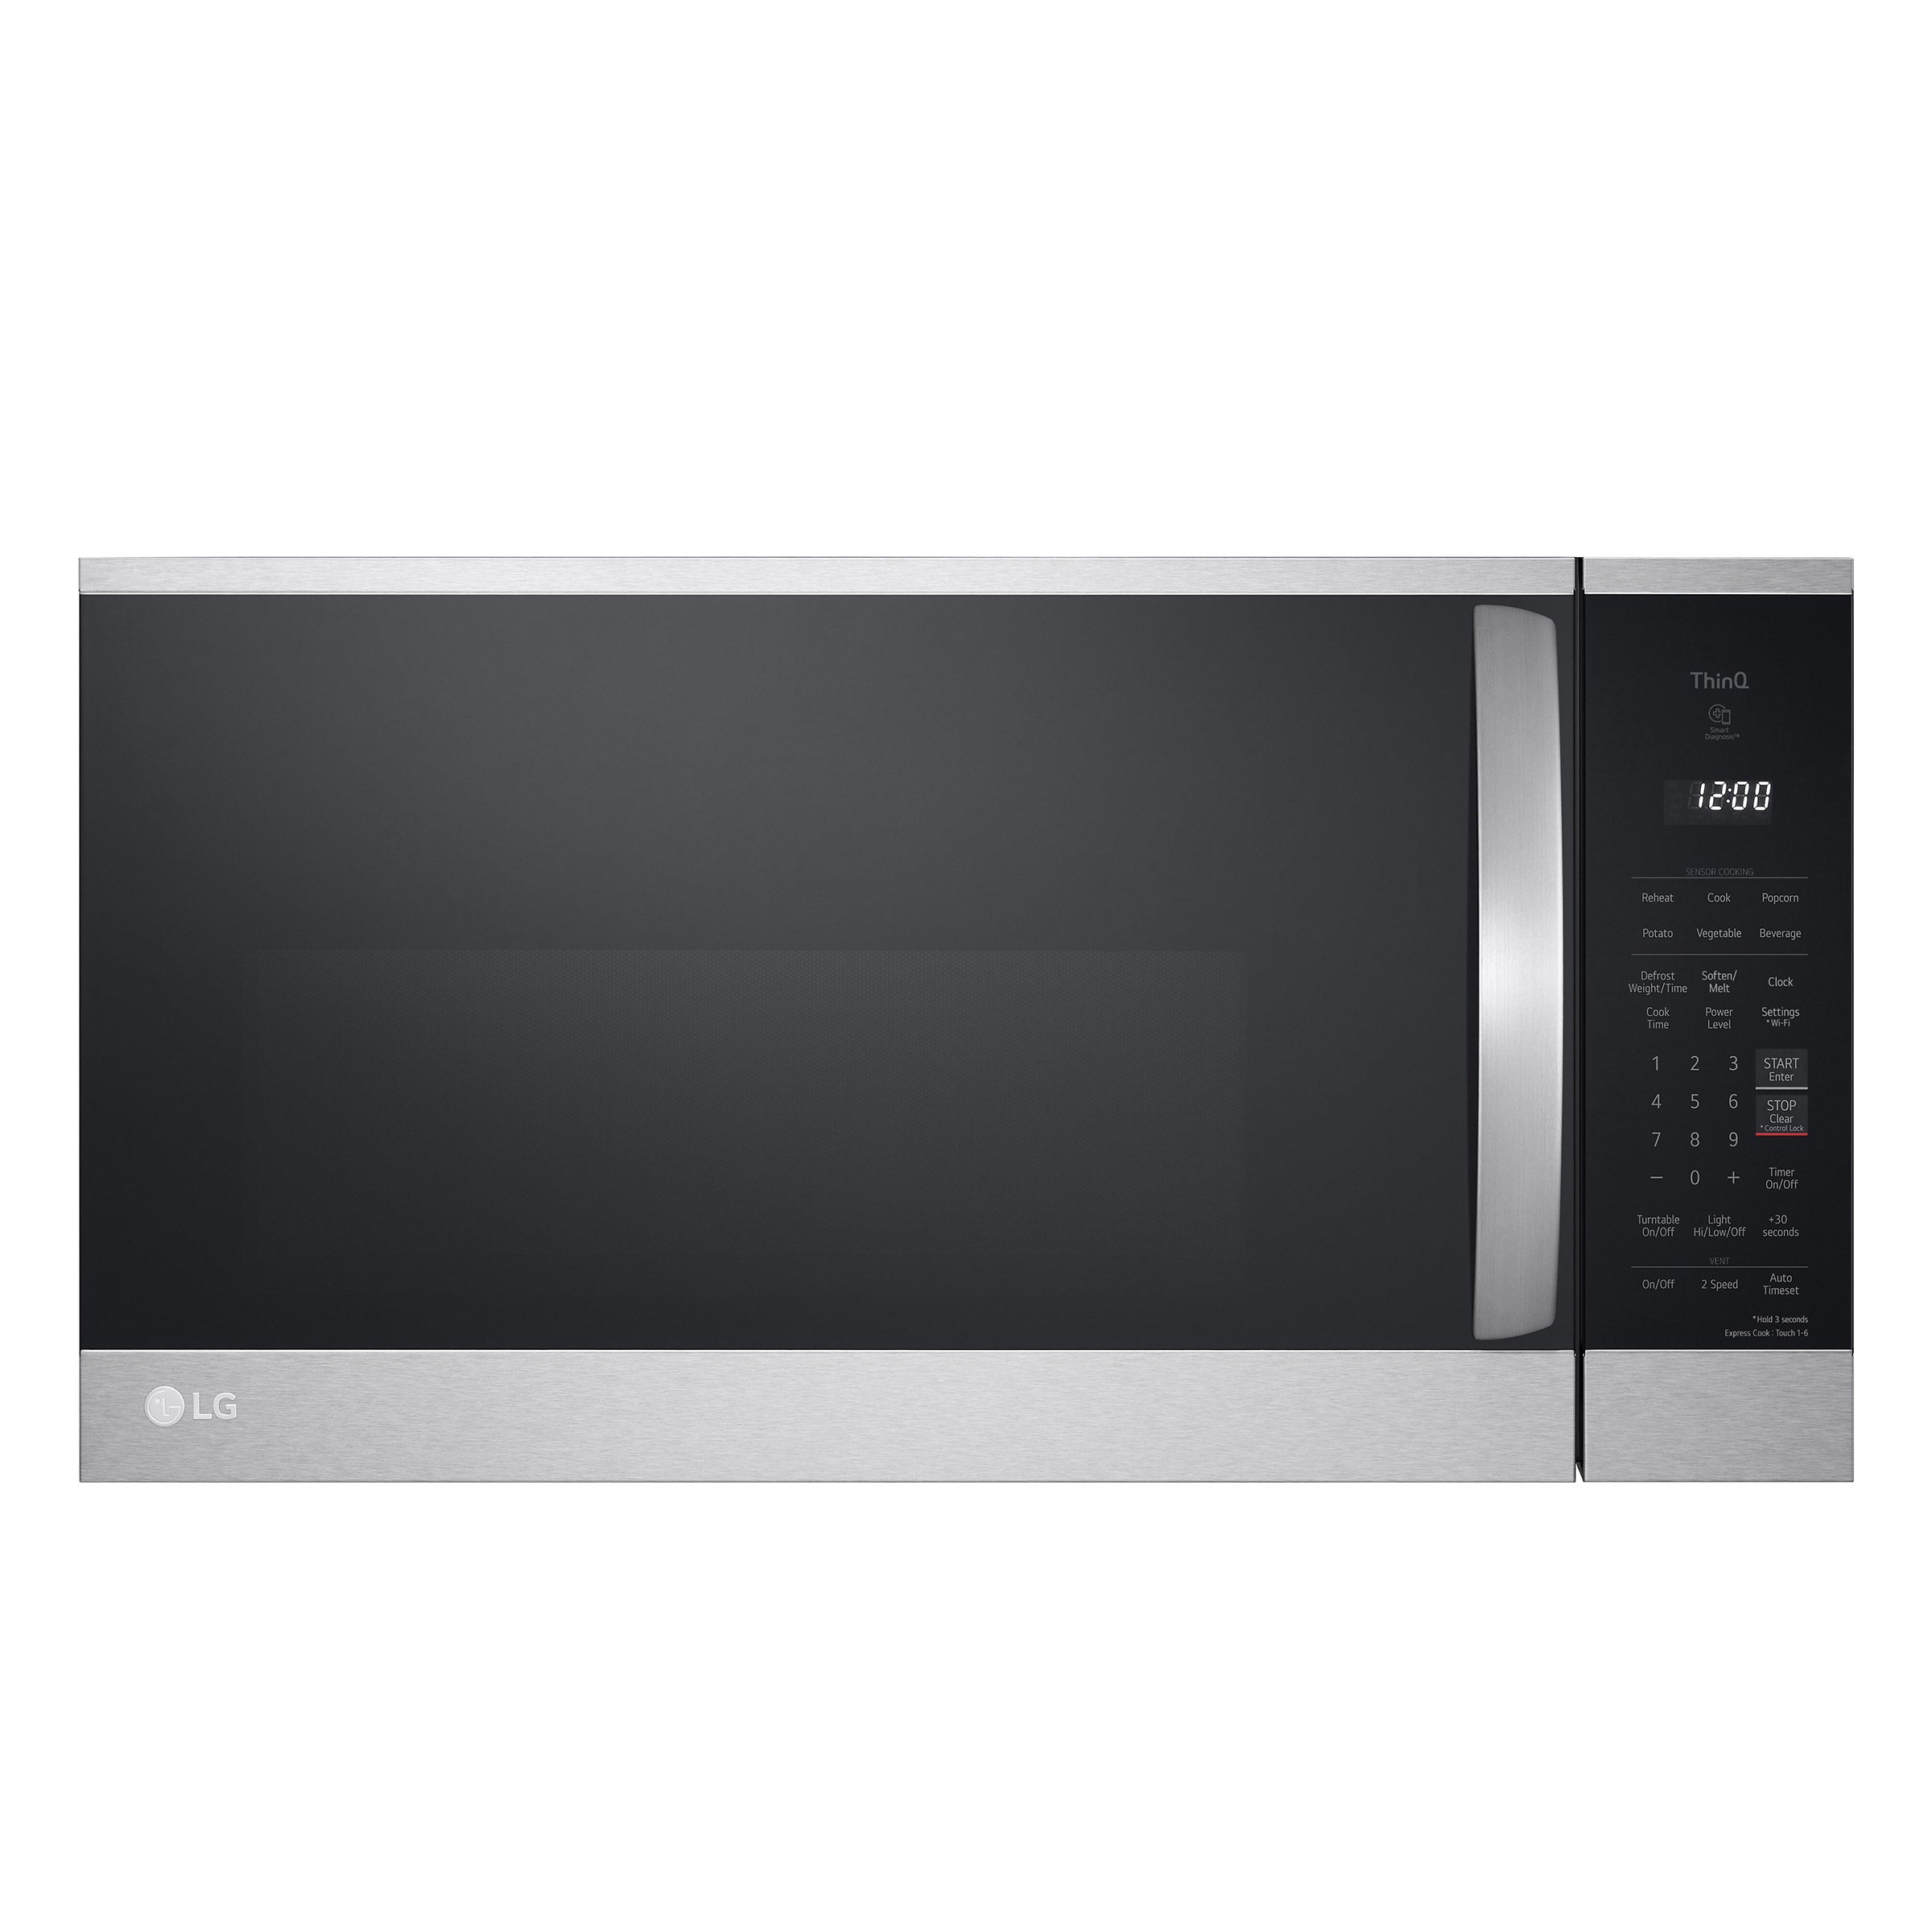 LG 1.8 cu. ft. Smart Wi-Fi Enabled Over-the-Range Microwave Oven with EasyClean Image